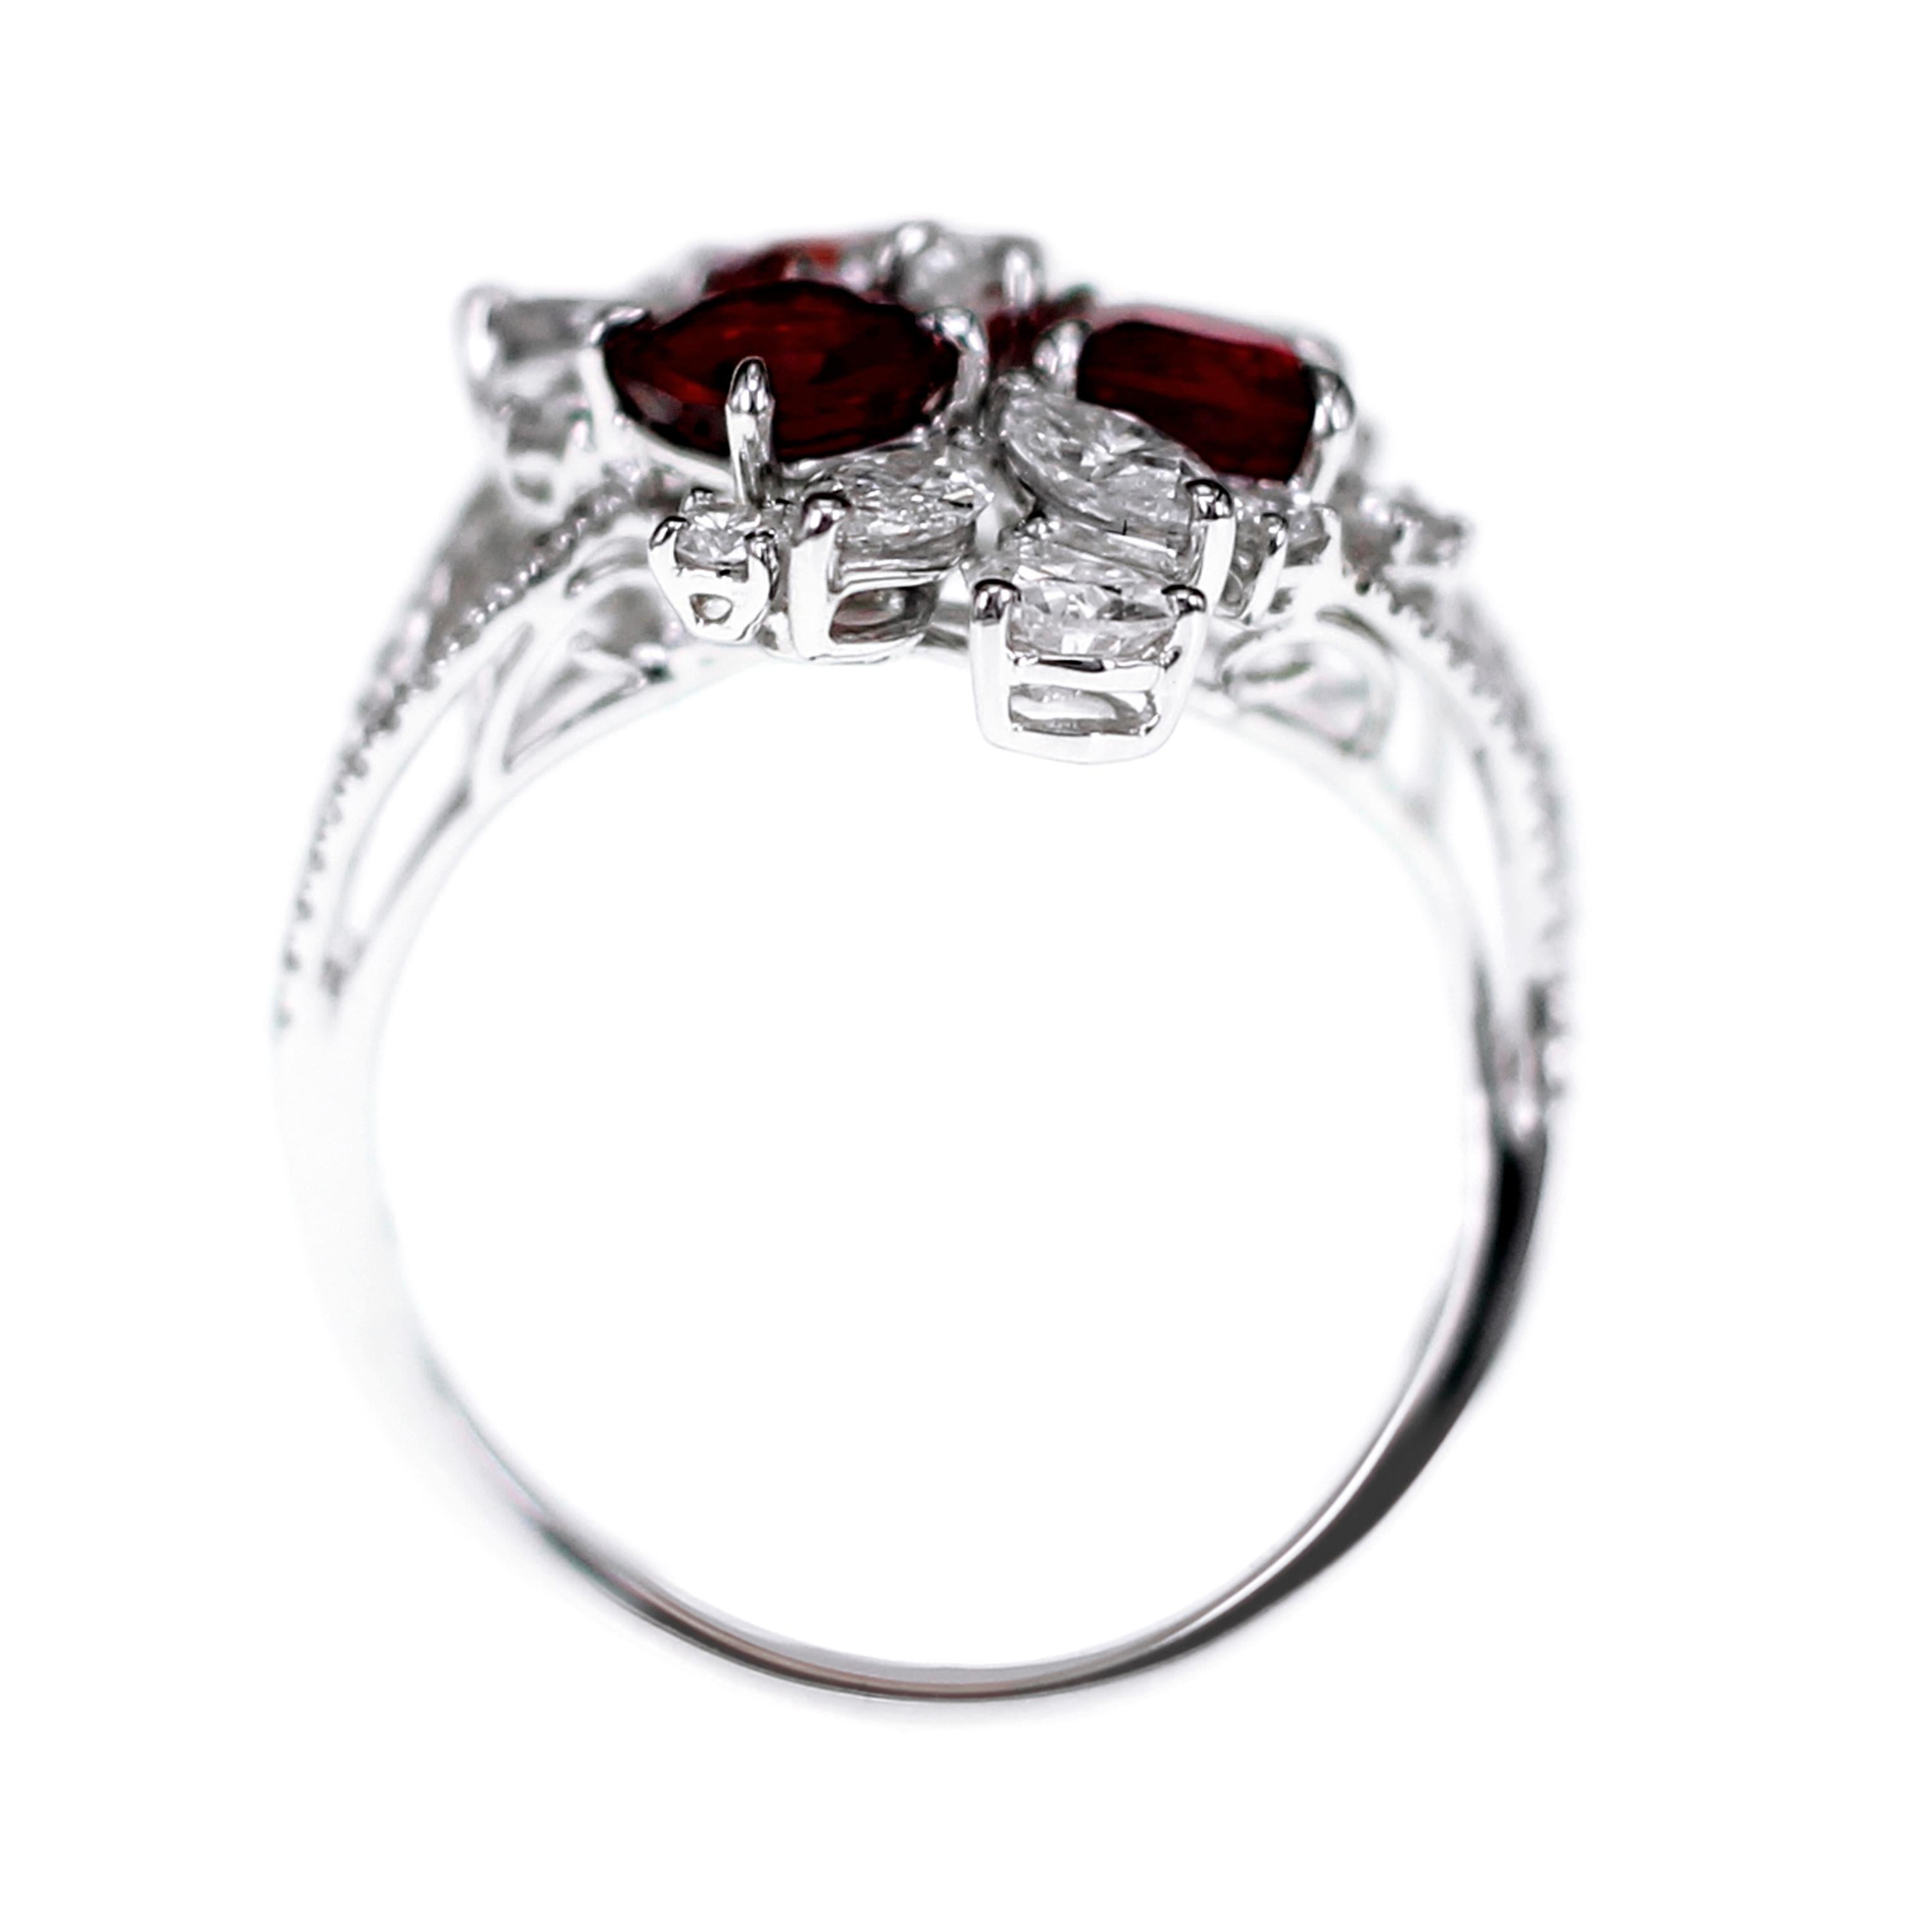 Women's or Men's 1.89 Carat of Burma Vivid Red Spinel Cocktail Ring For Sale